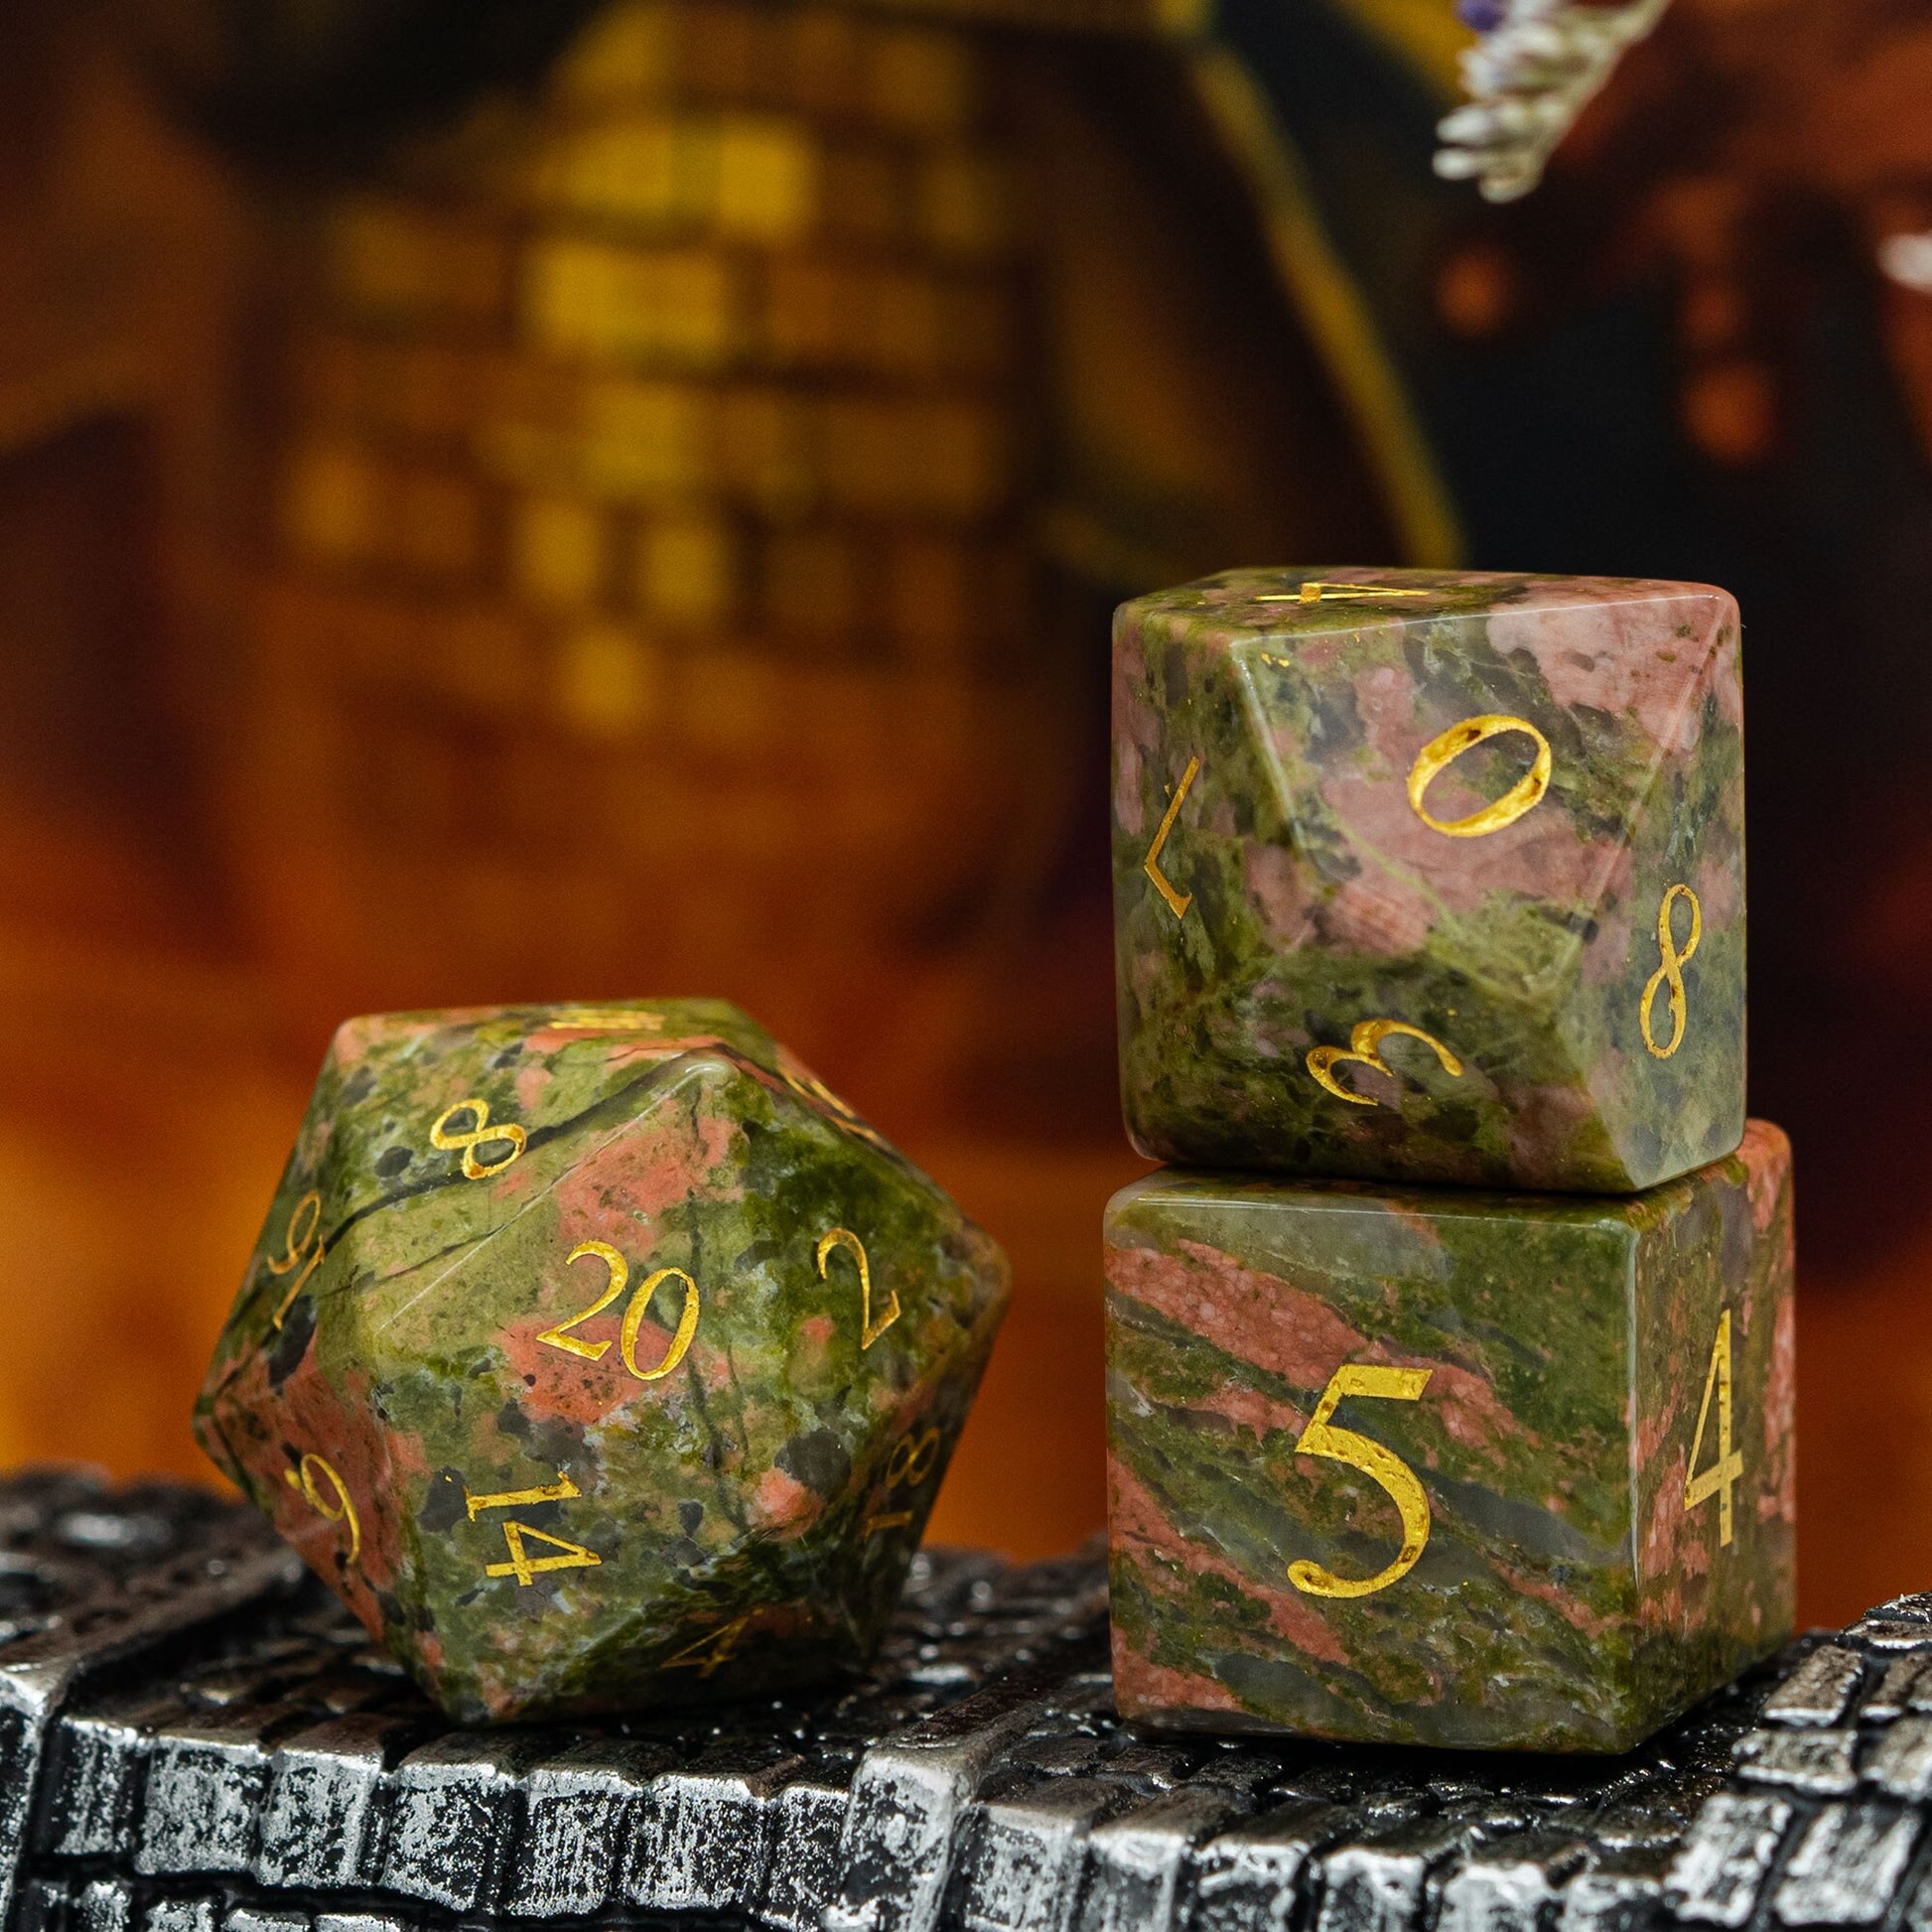 d20, d10 and d6 stone dice sitting on fallen tower